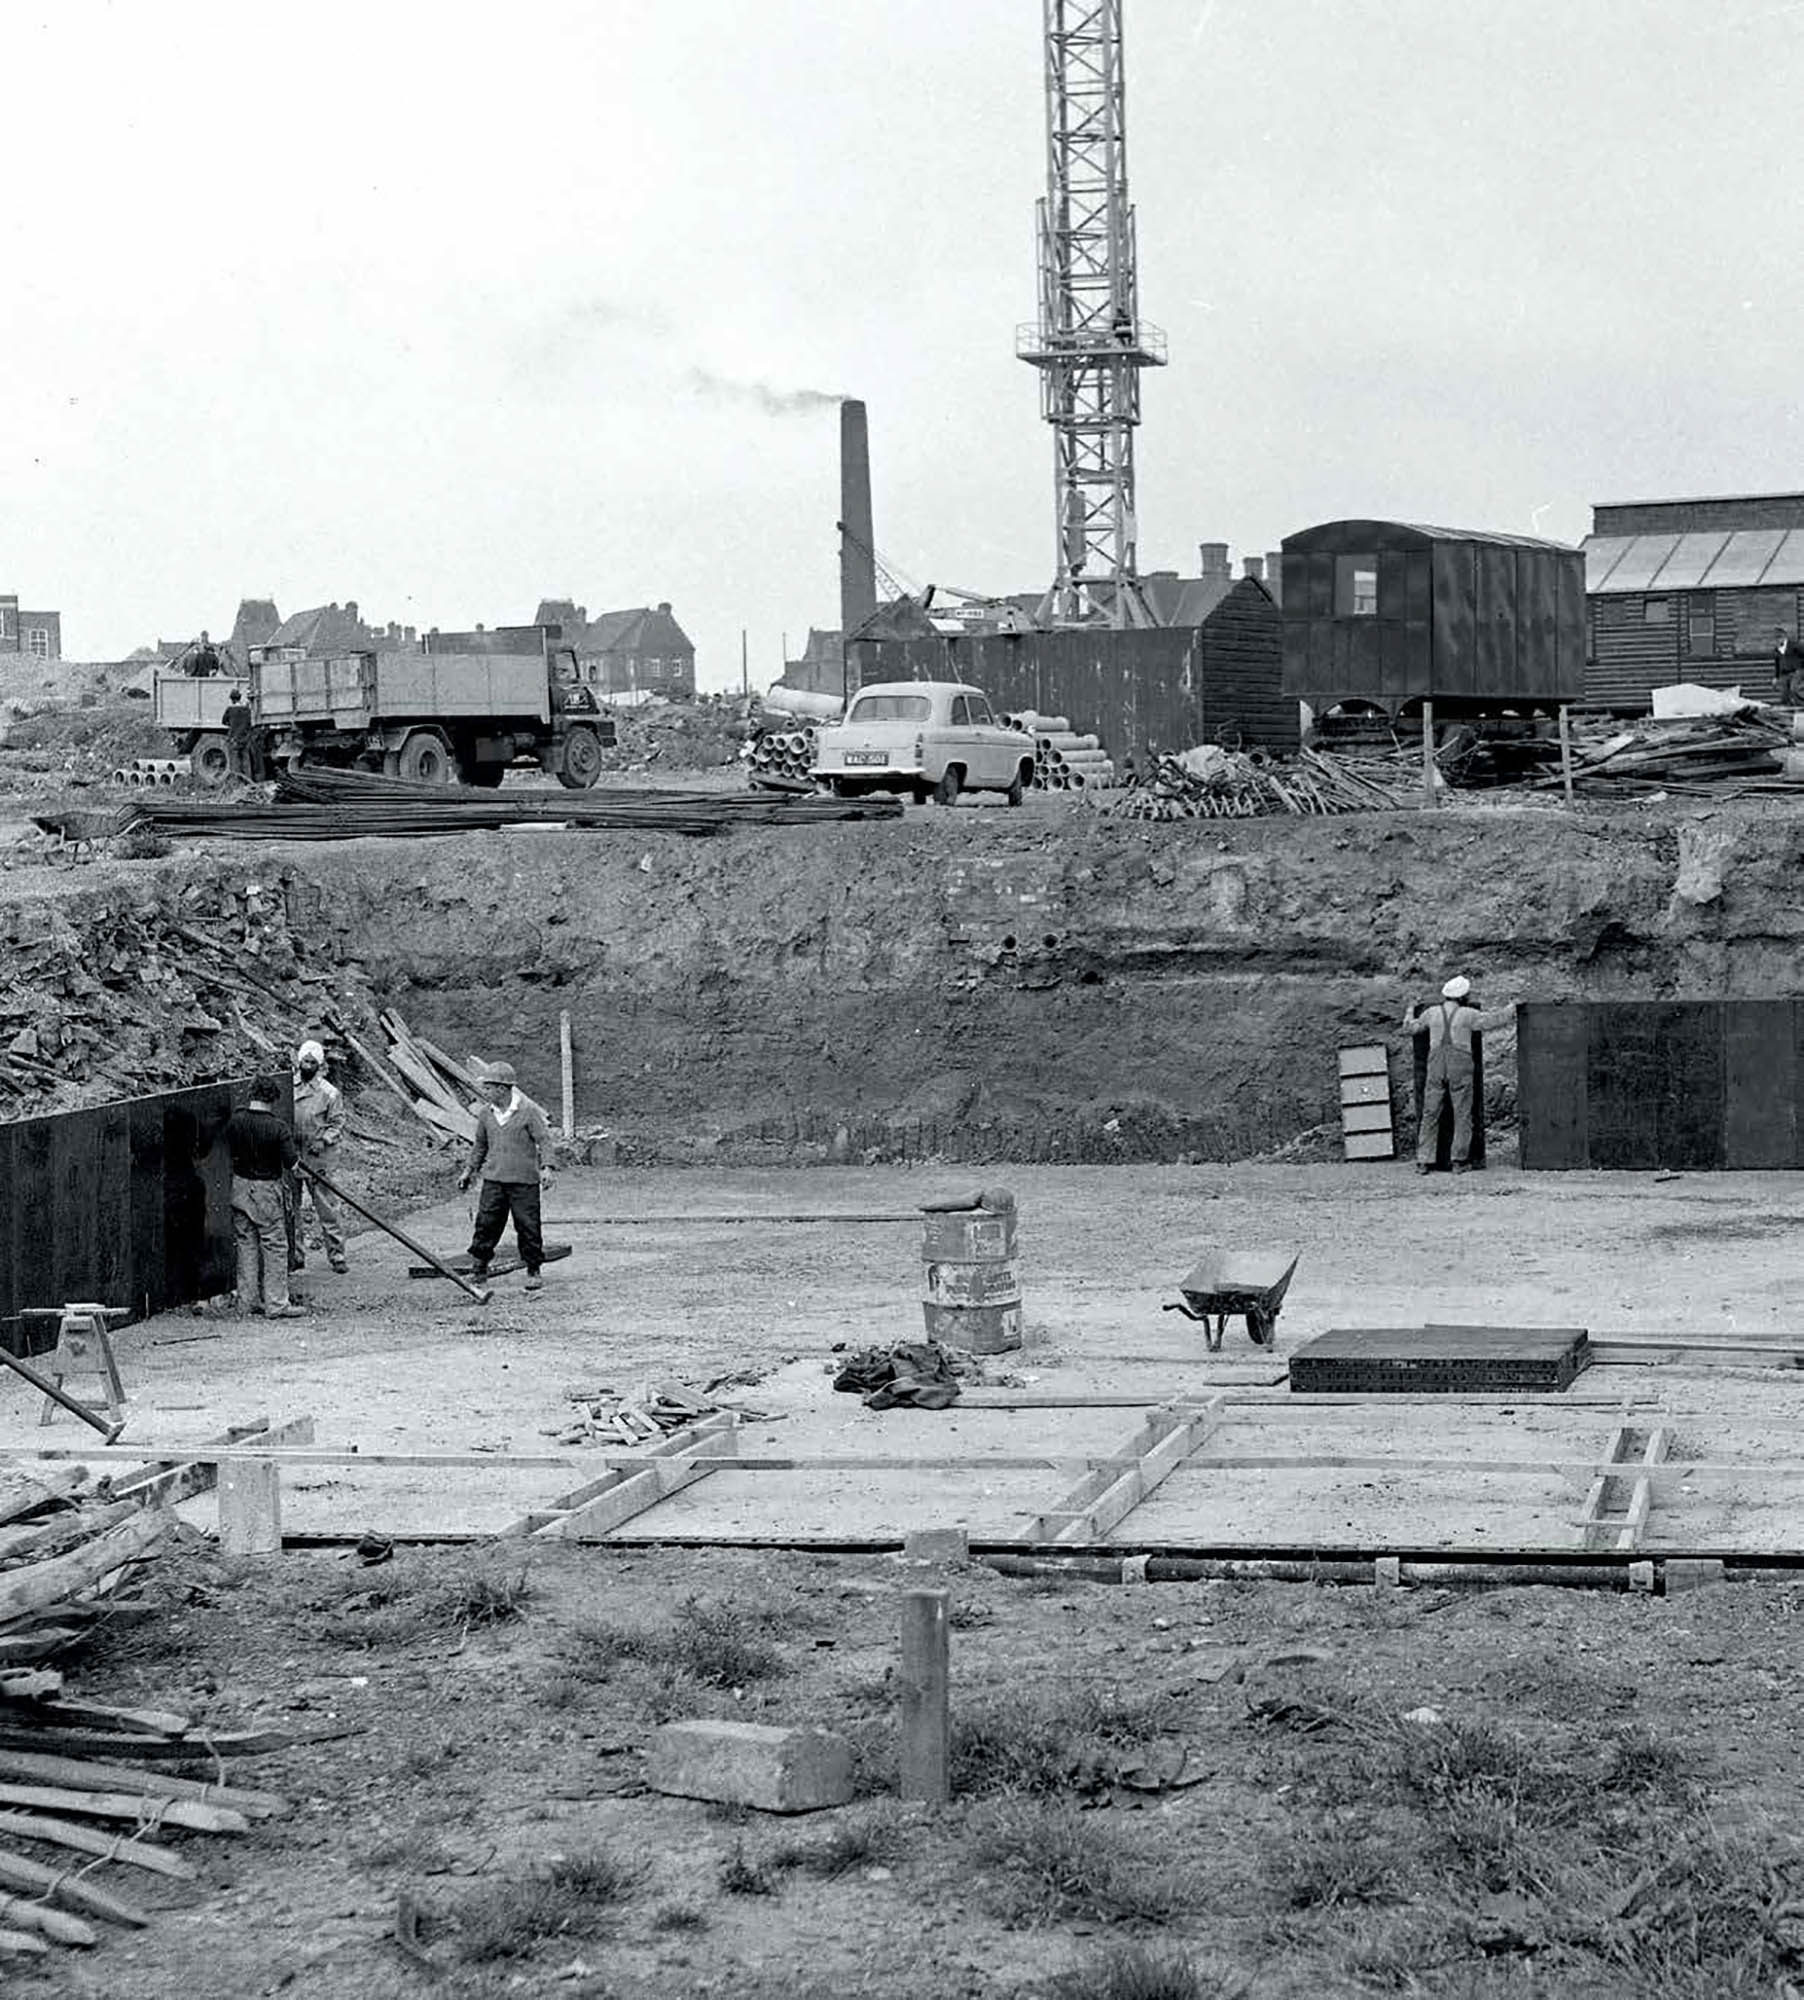 Development of the Highfields estate in 1968 - Leicester City Council